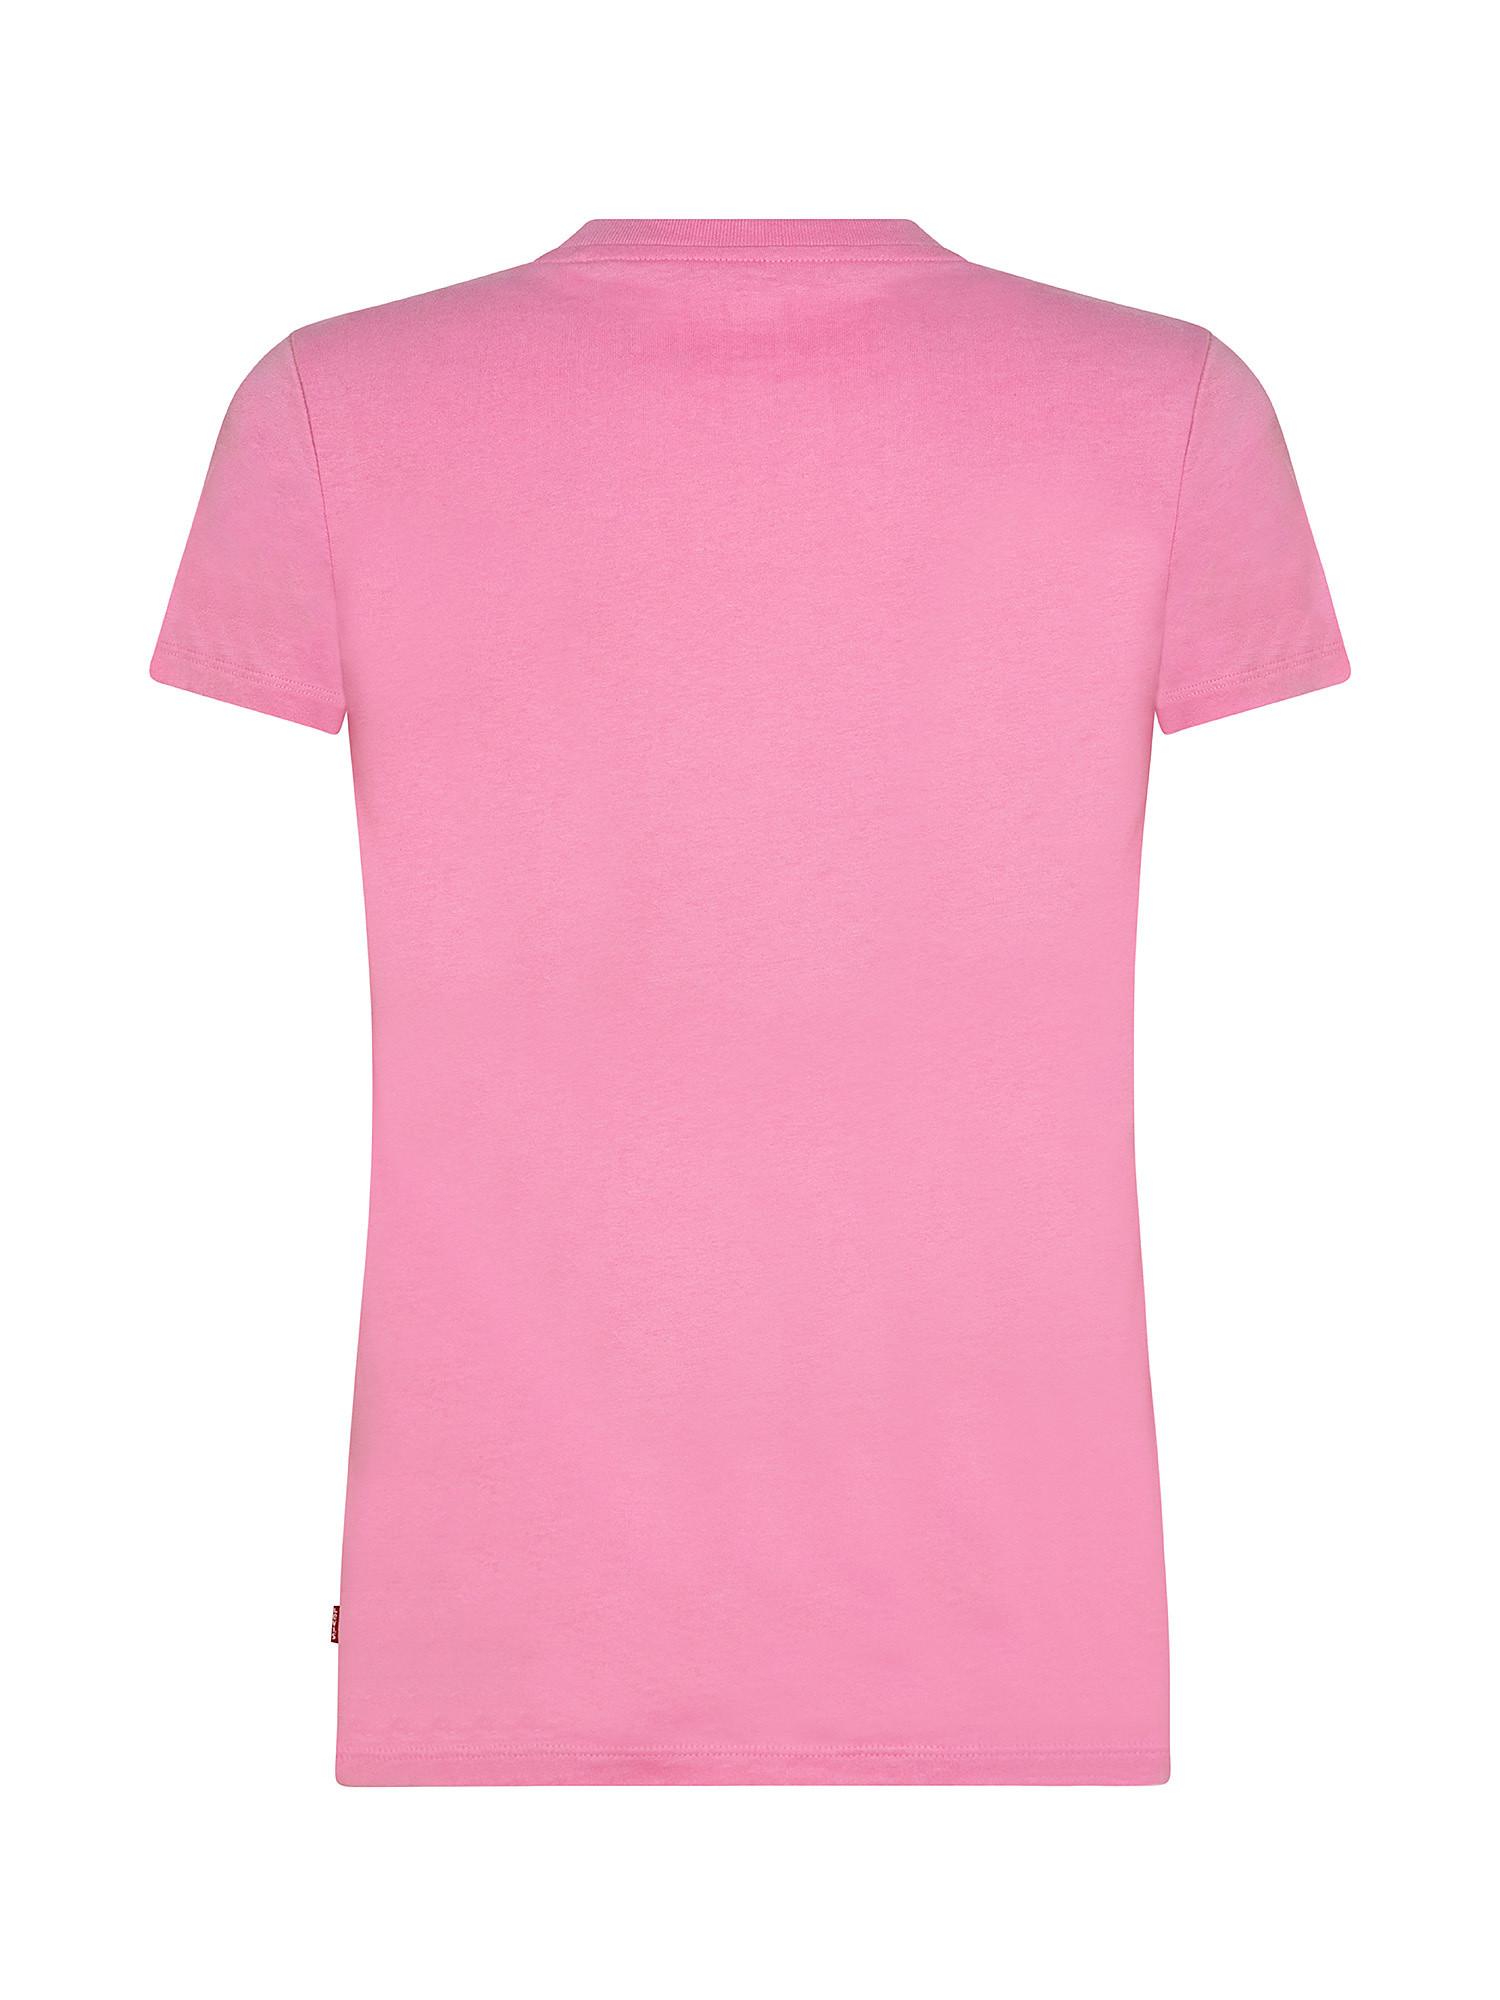 Perfect Tee T-shirt, Pink, large image number 1